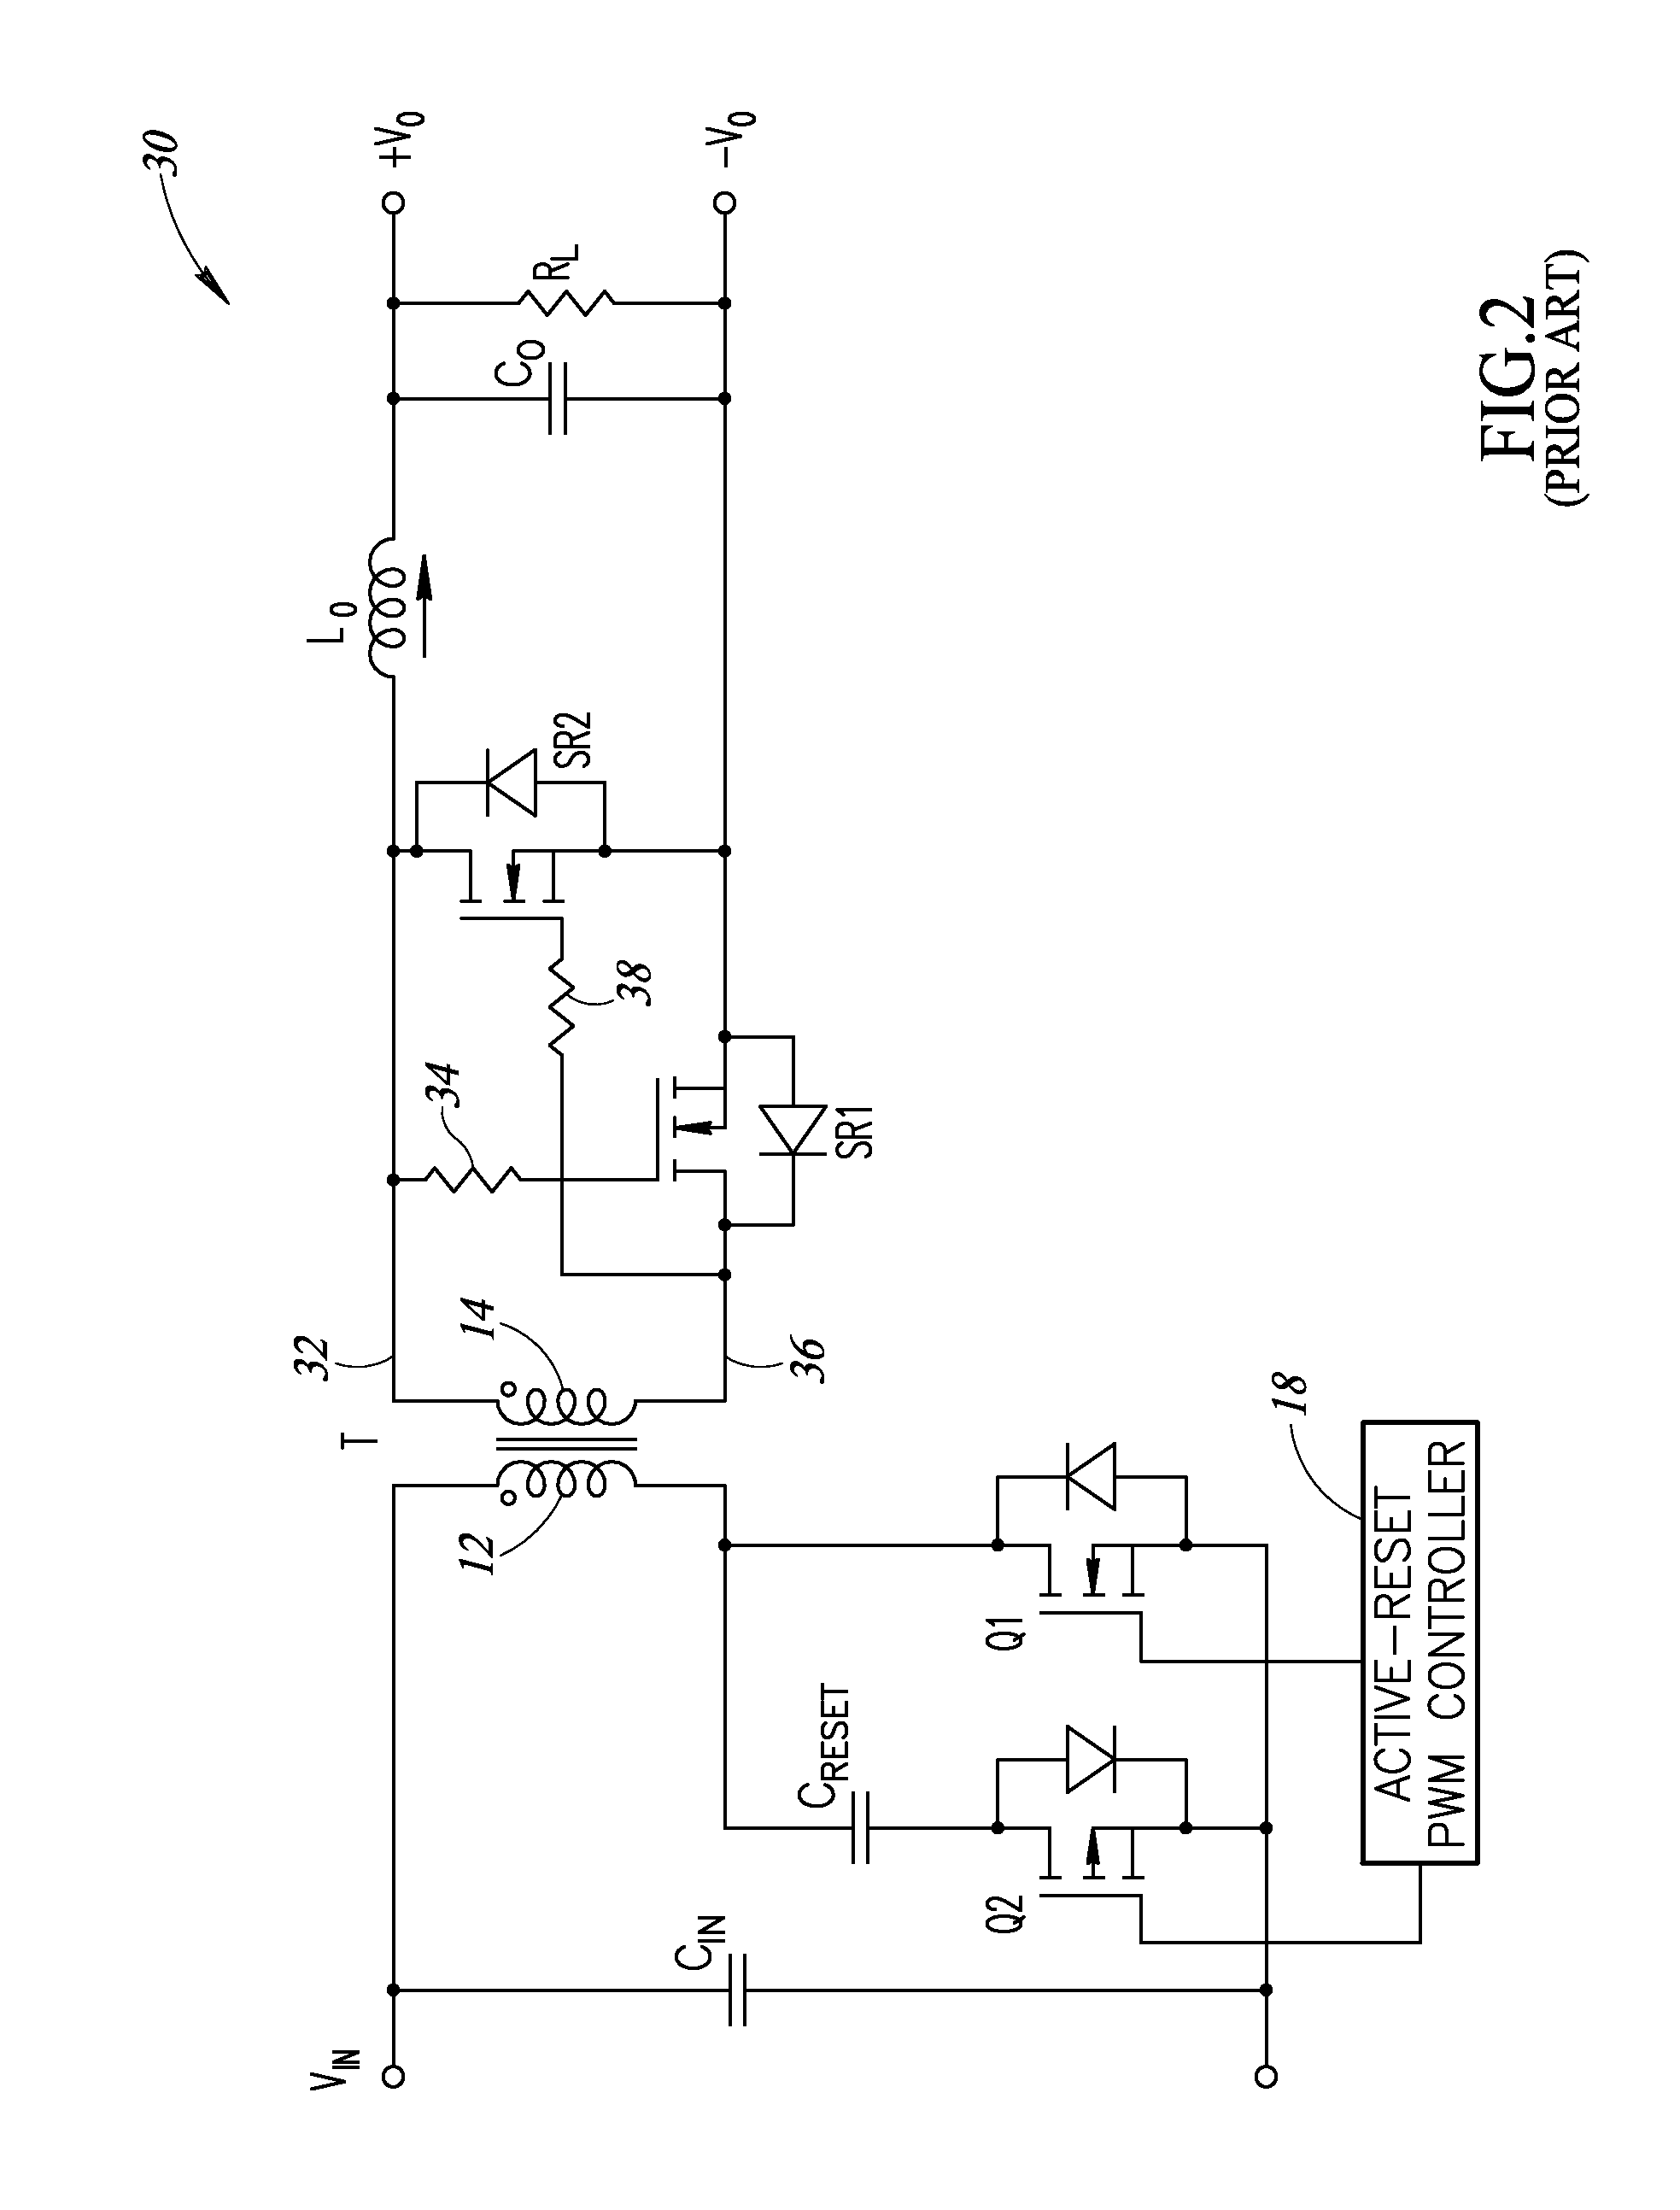 Automatic enhanced self-driven synchronous rectification for power converters